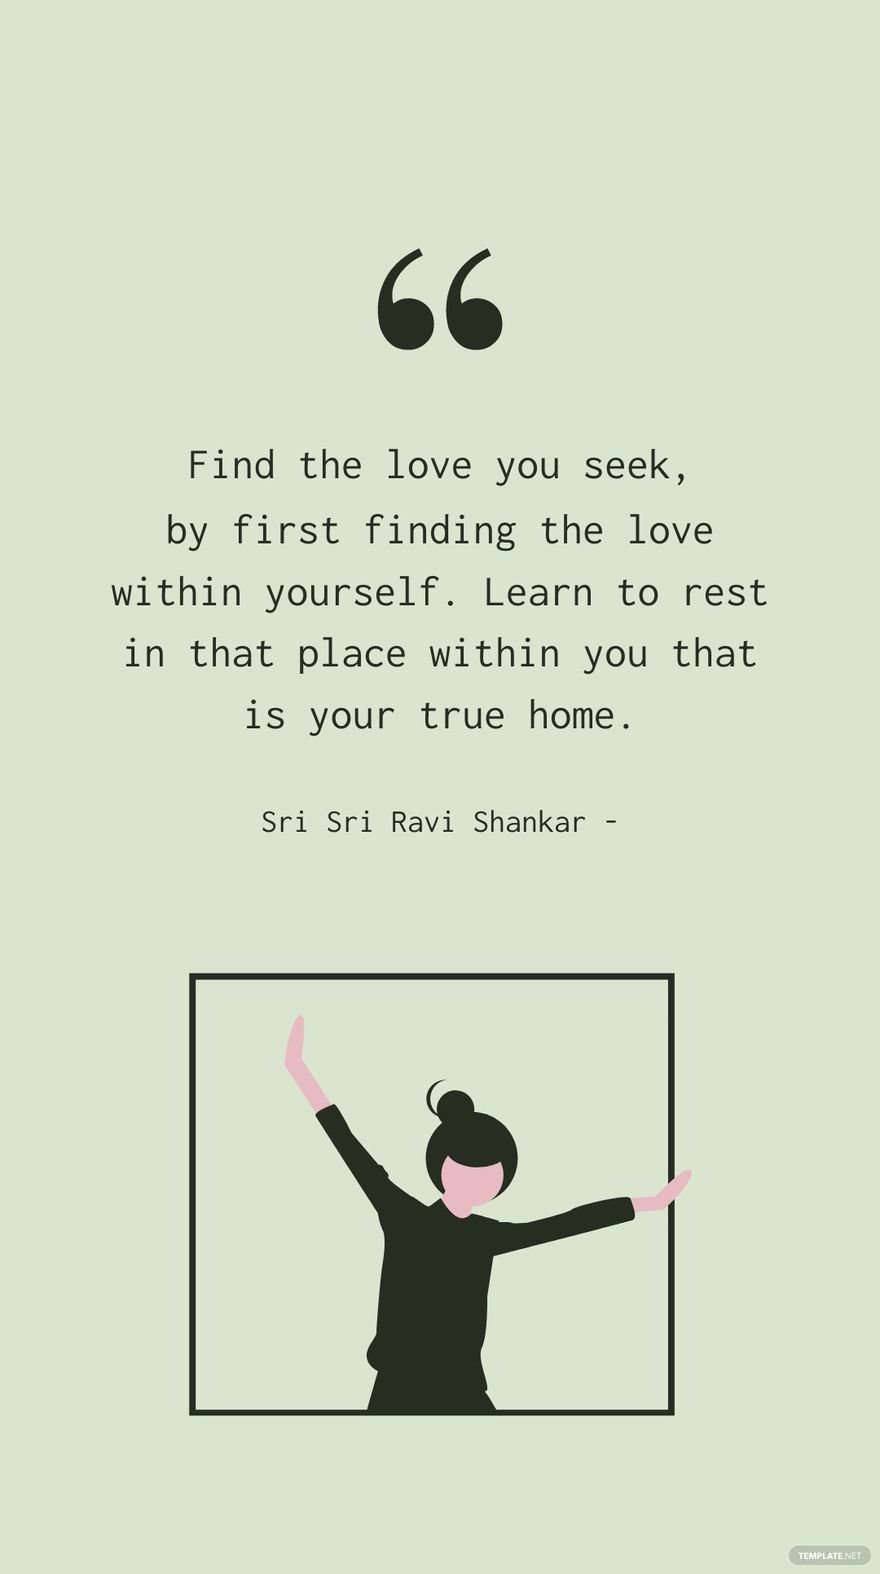 Sri Sri Ravi Shankar - Find the love you seek, by first finding the love within yourself. Learn to rest in that place within you that is your true home.